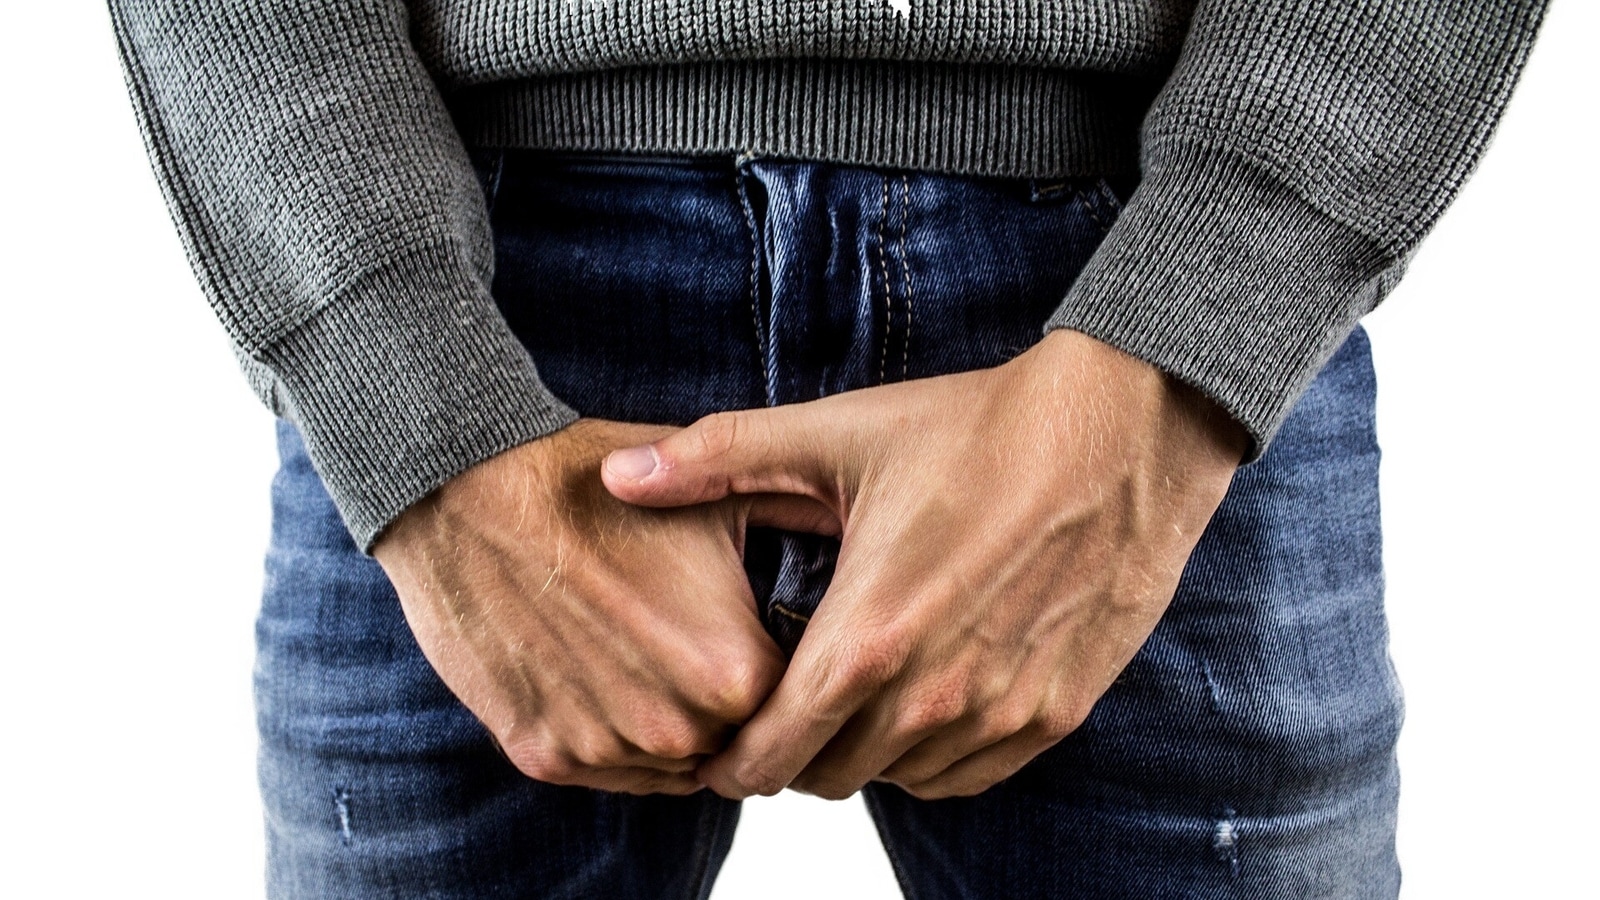 Men's health tips: Can tight jeans cause testicular cancer? Doctors answer